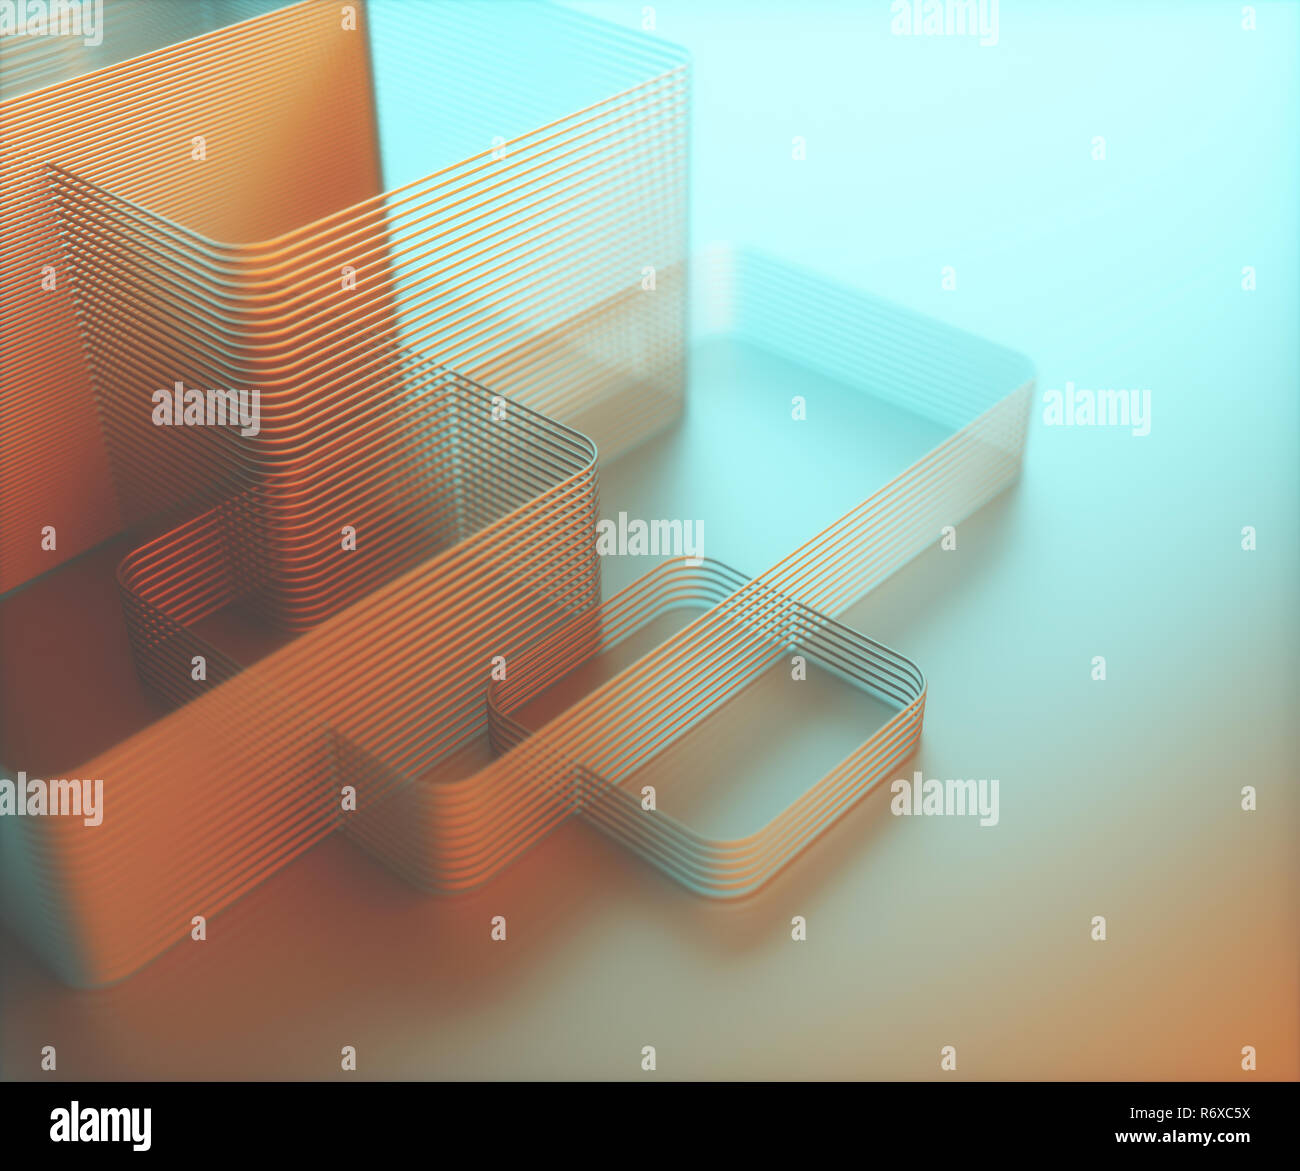 Artistic 3D Abstract Structure Stock Photo